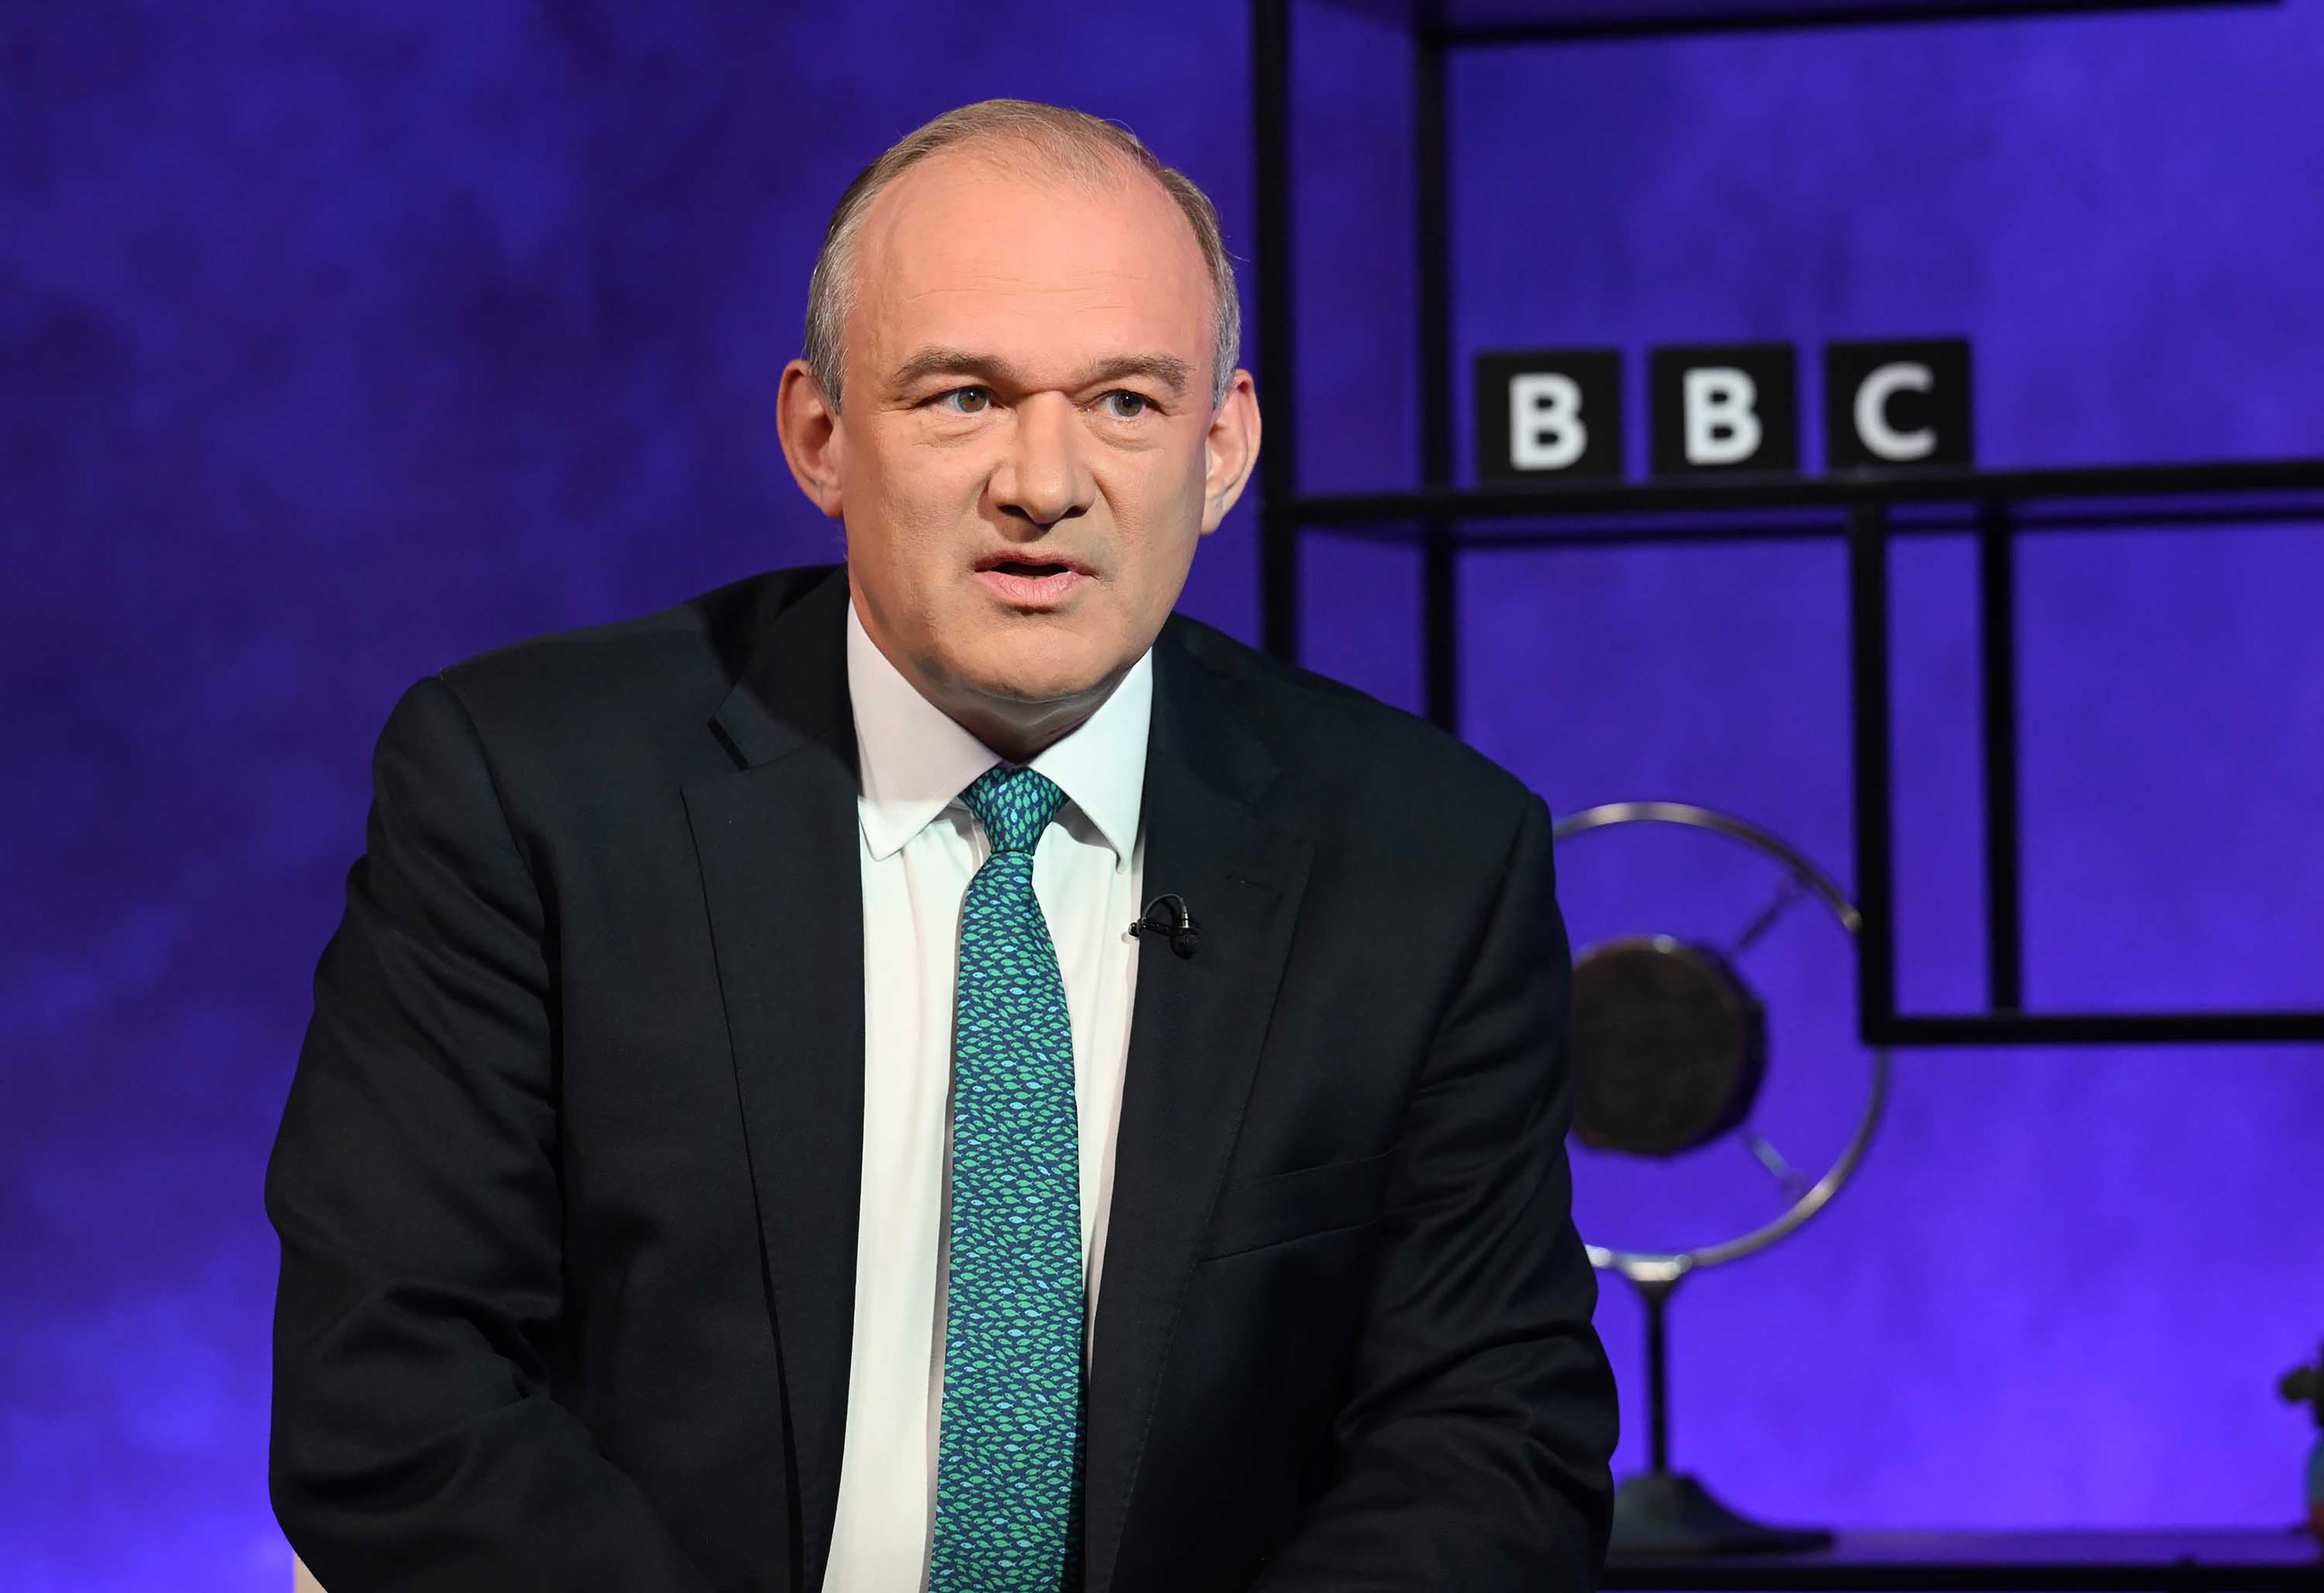 Liberal Democrats leader Ed Davey appears during a BBC General Election interview Panorama special, hosted by Nick Robinson (BBC/PA)